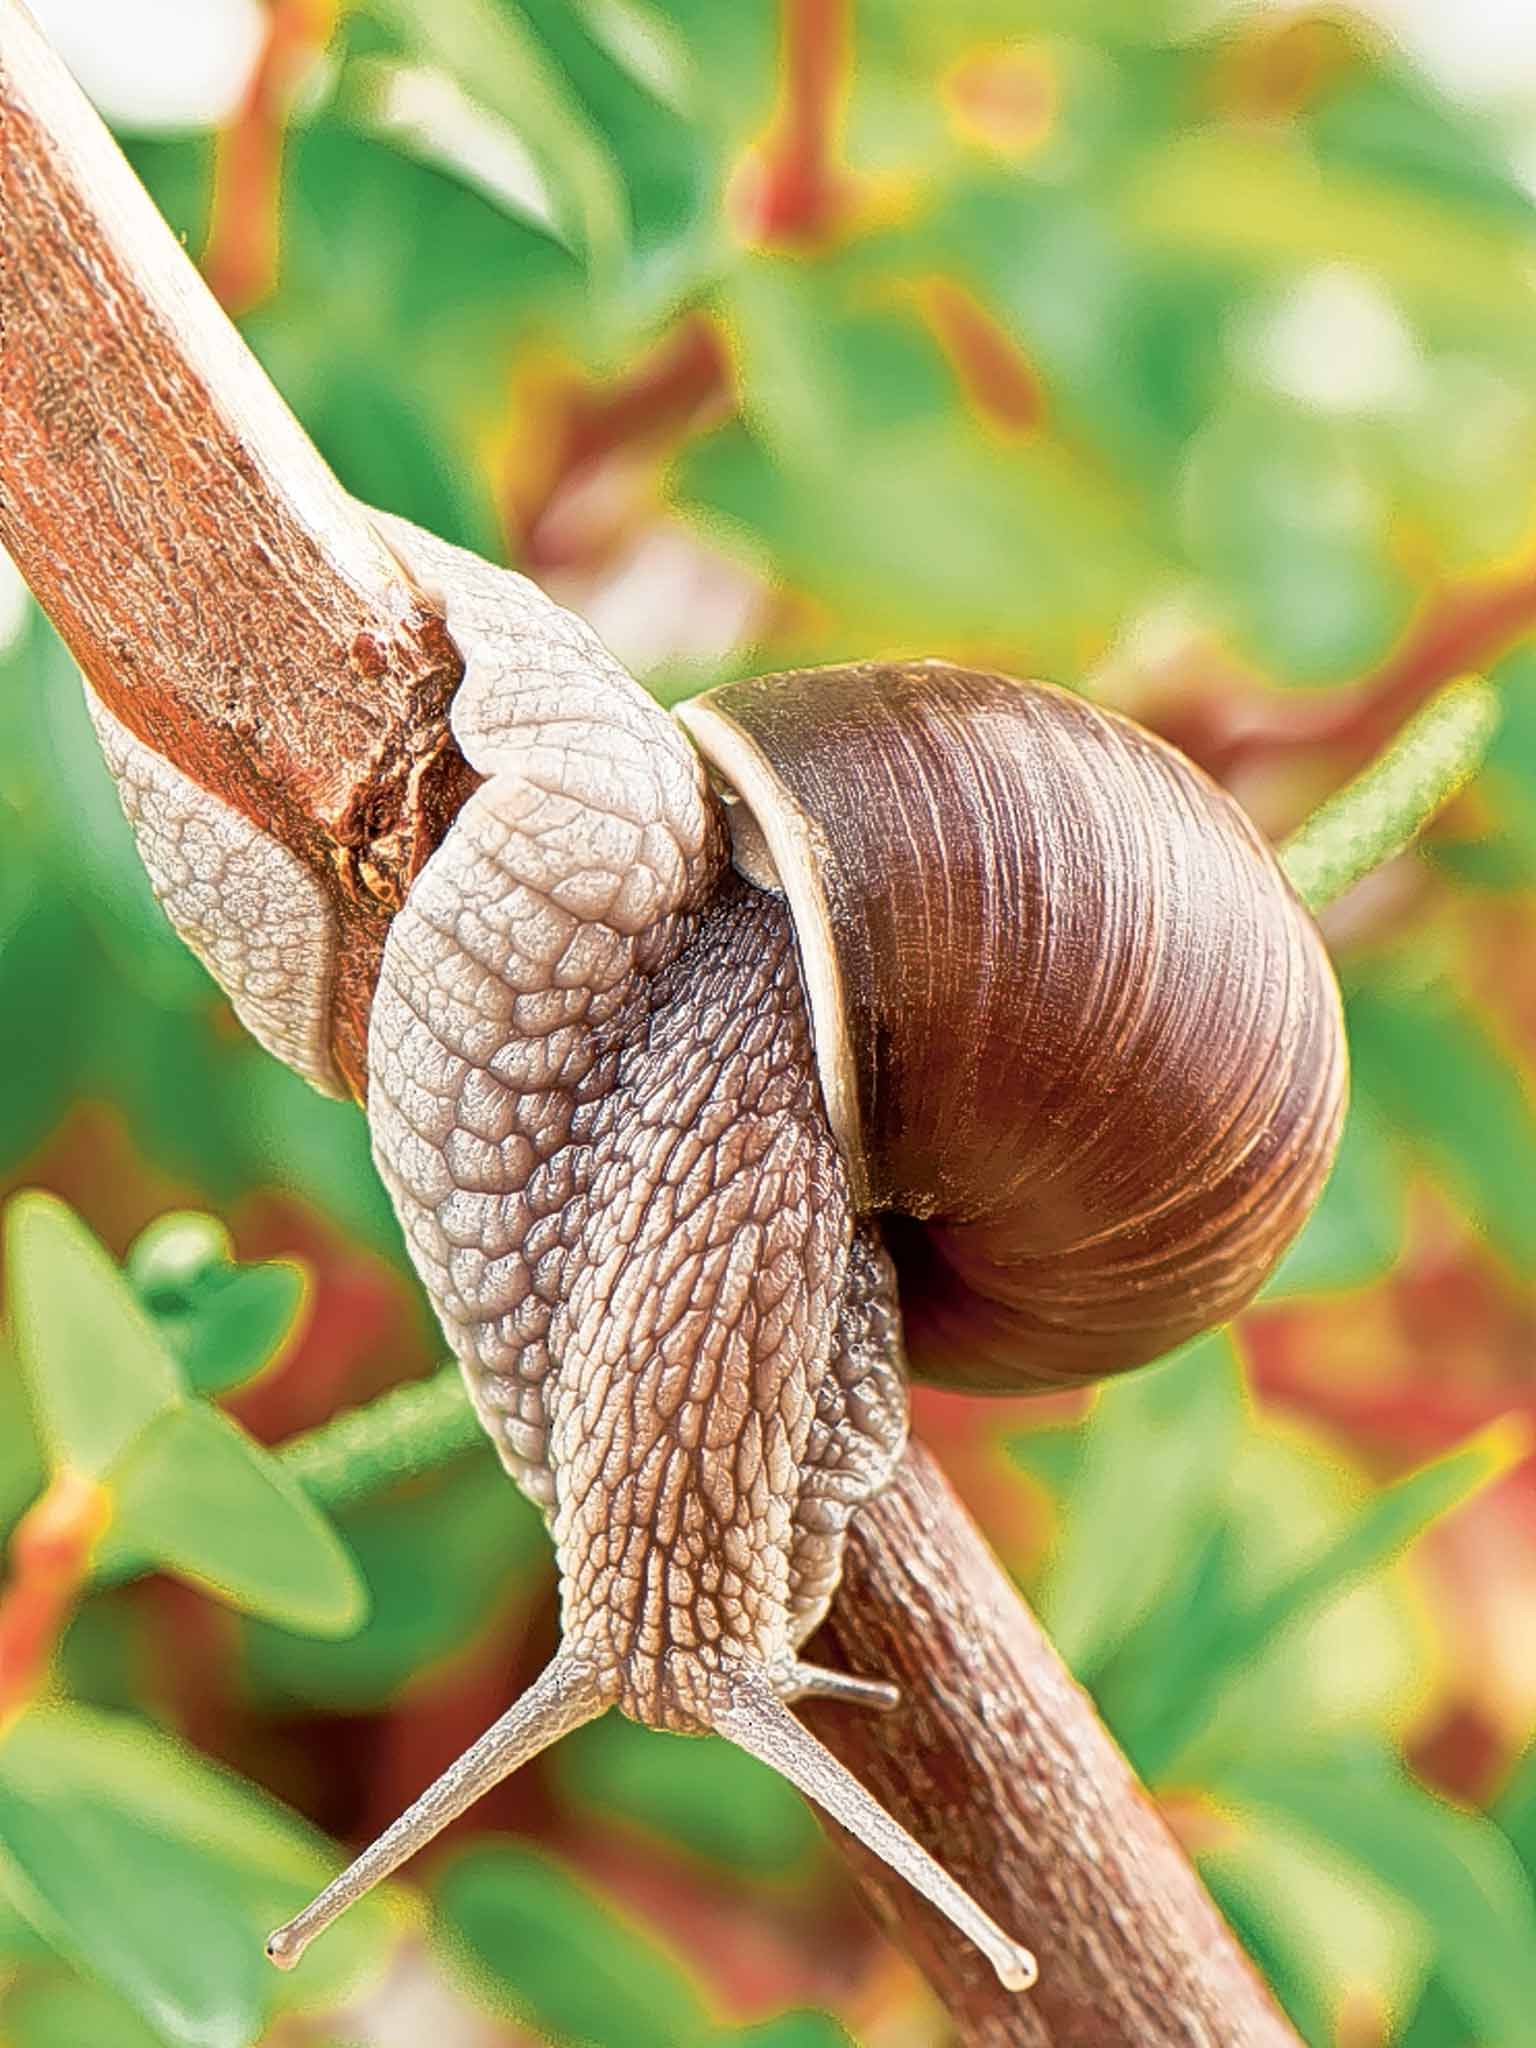 Snails and slugs are most gardeners' number one enemy, and most of us will enthuse over a discussion about how best to repel them